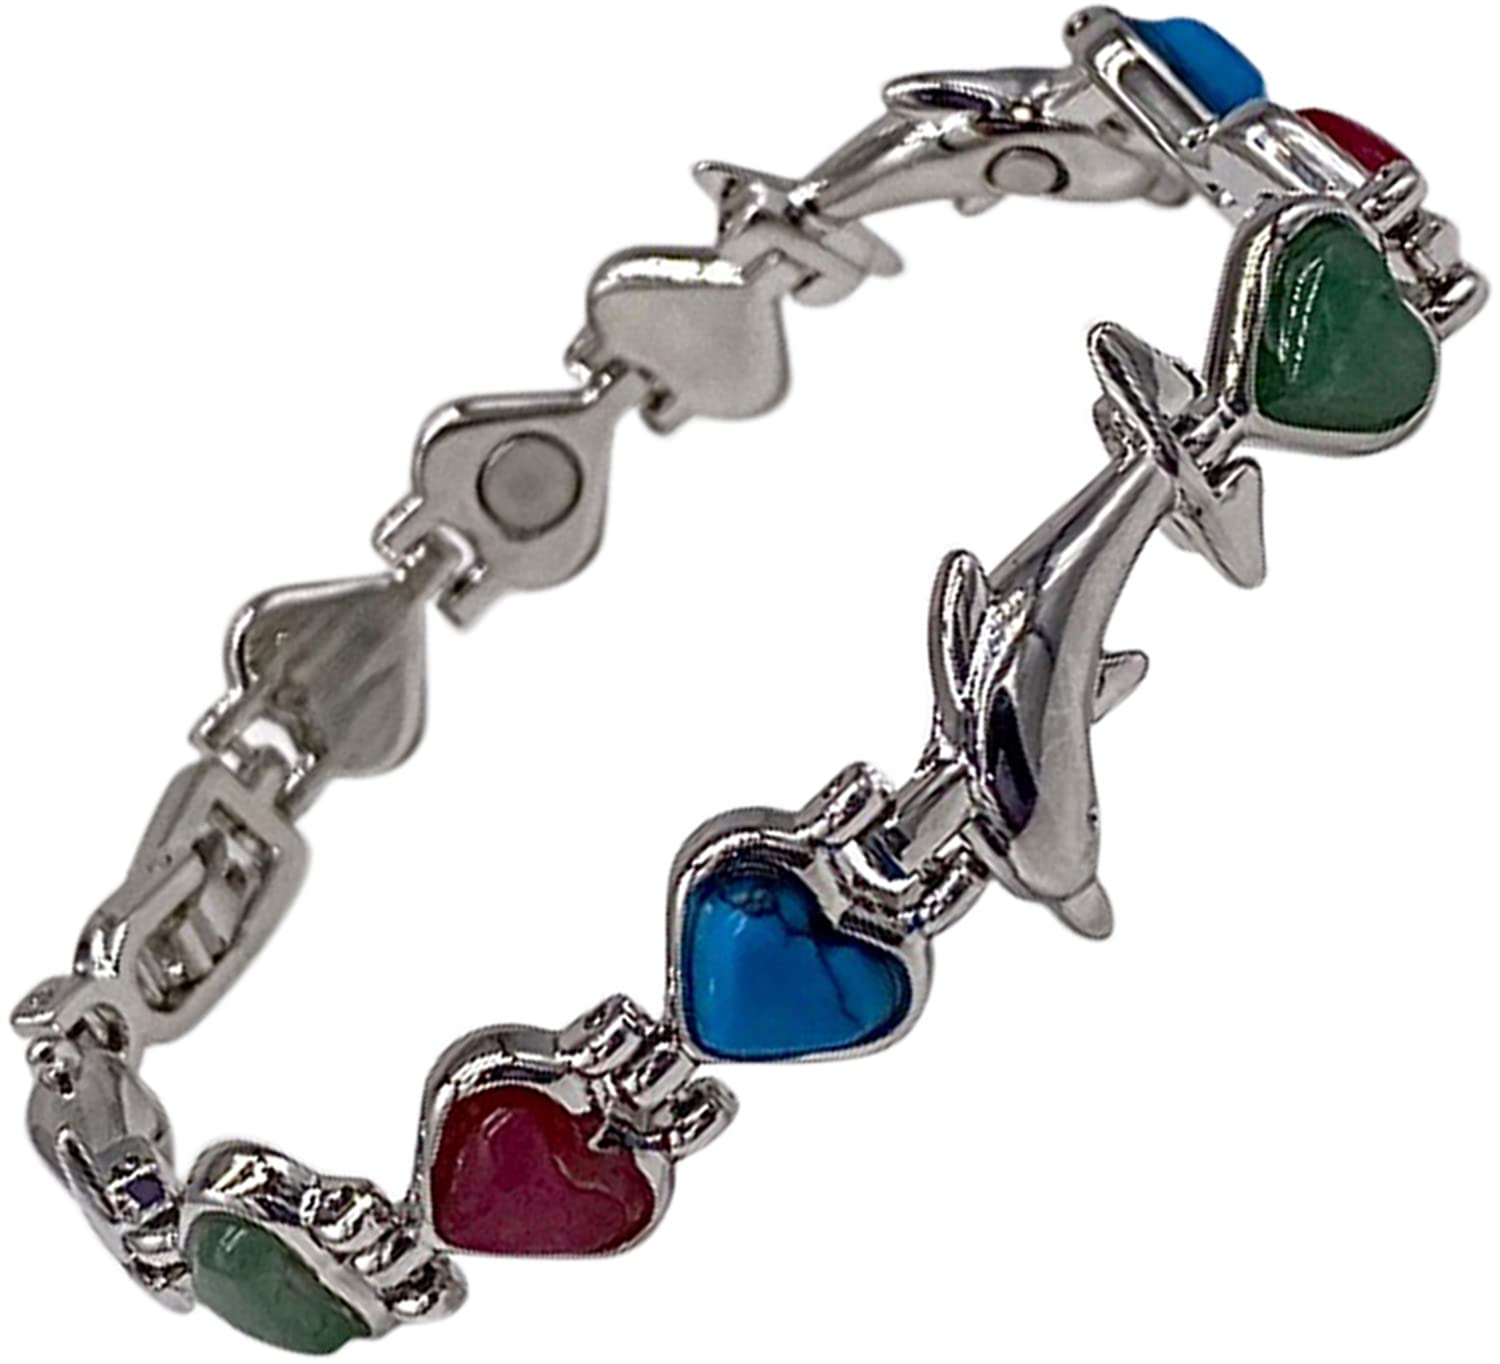 Ladies Magnetic Bracelet for Women - Natural Gemstone Heart Crystals &amp; Dolphins - Fits Wrists Up to 18.5cm Adjustable - Plus Jewellery Gift Box (Silver)